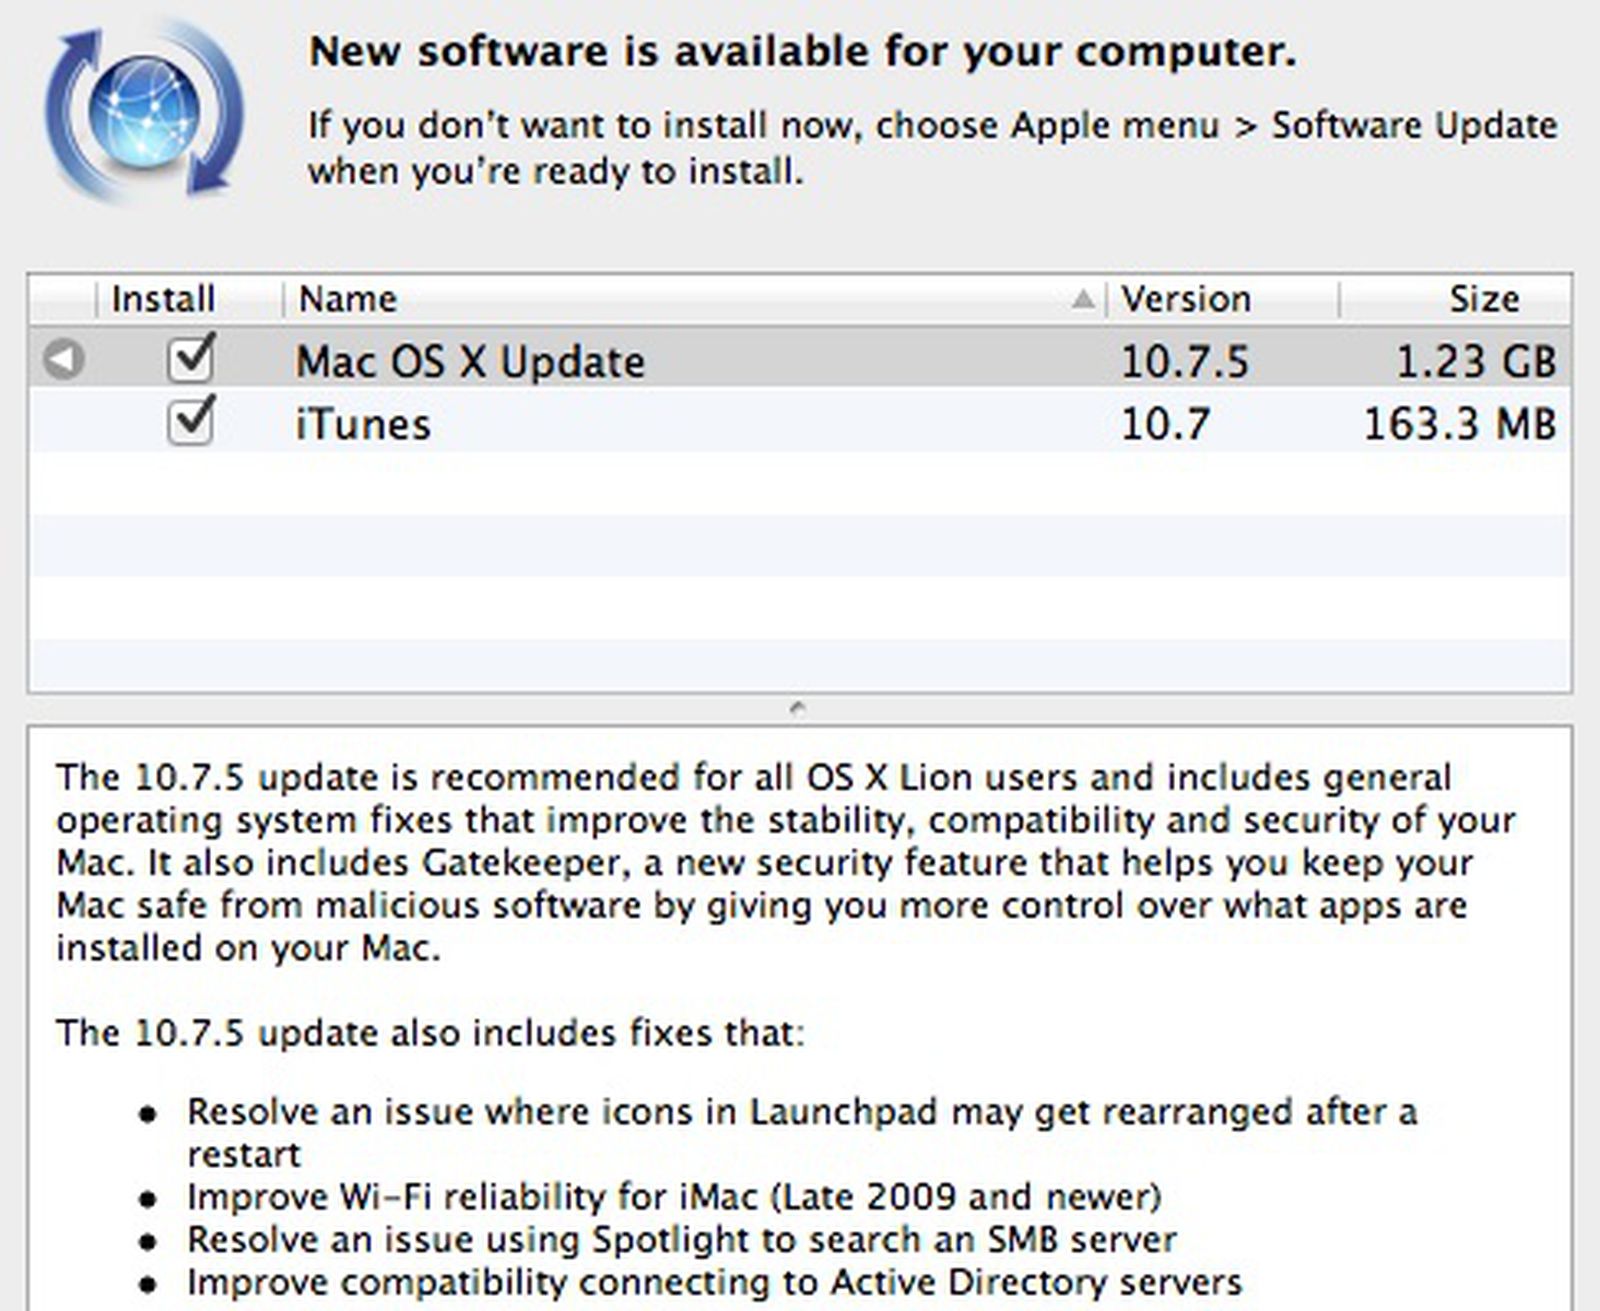 upgrade mac operating system to 10.7